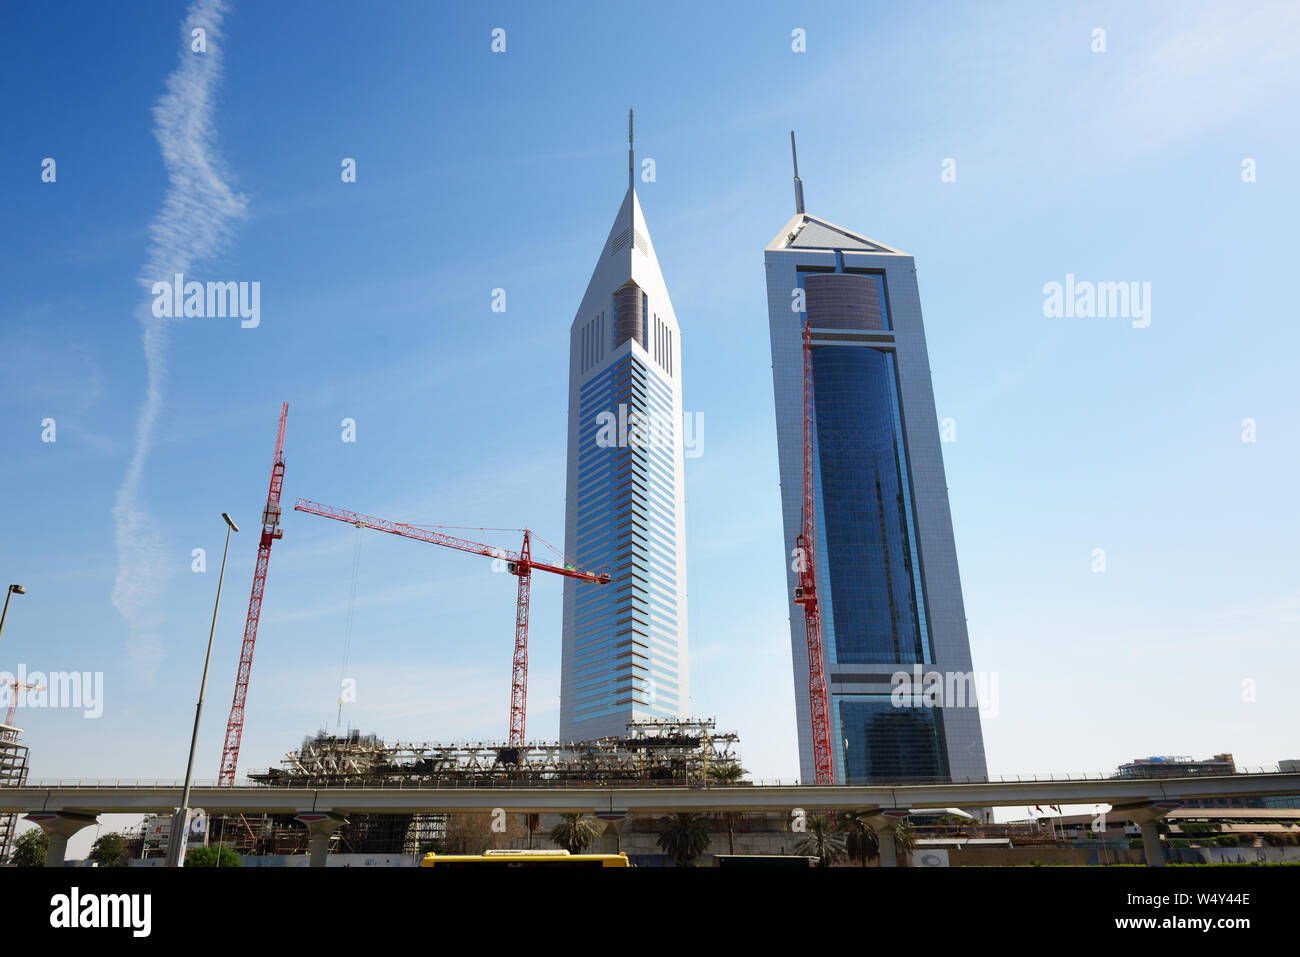 DUBAI, UAE - NOVEMBER 19: The view on Emirates Towers and new costruction on November 19, 2017. The Emirates Towers complex is set in over 570,000 m2 Stock Photo